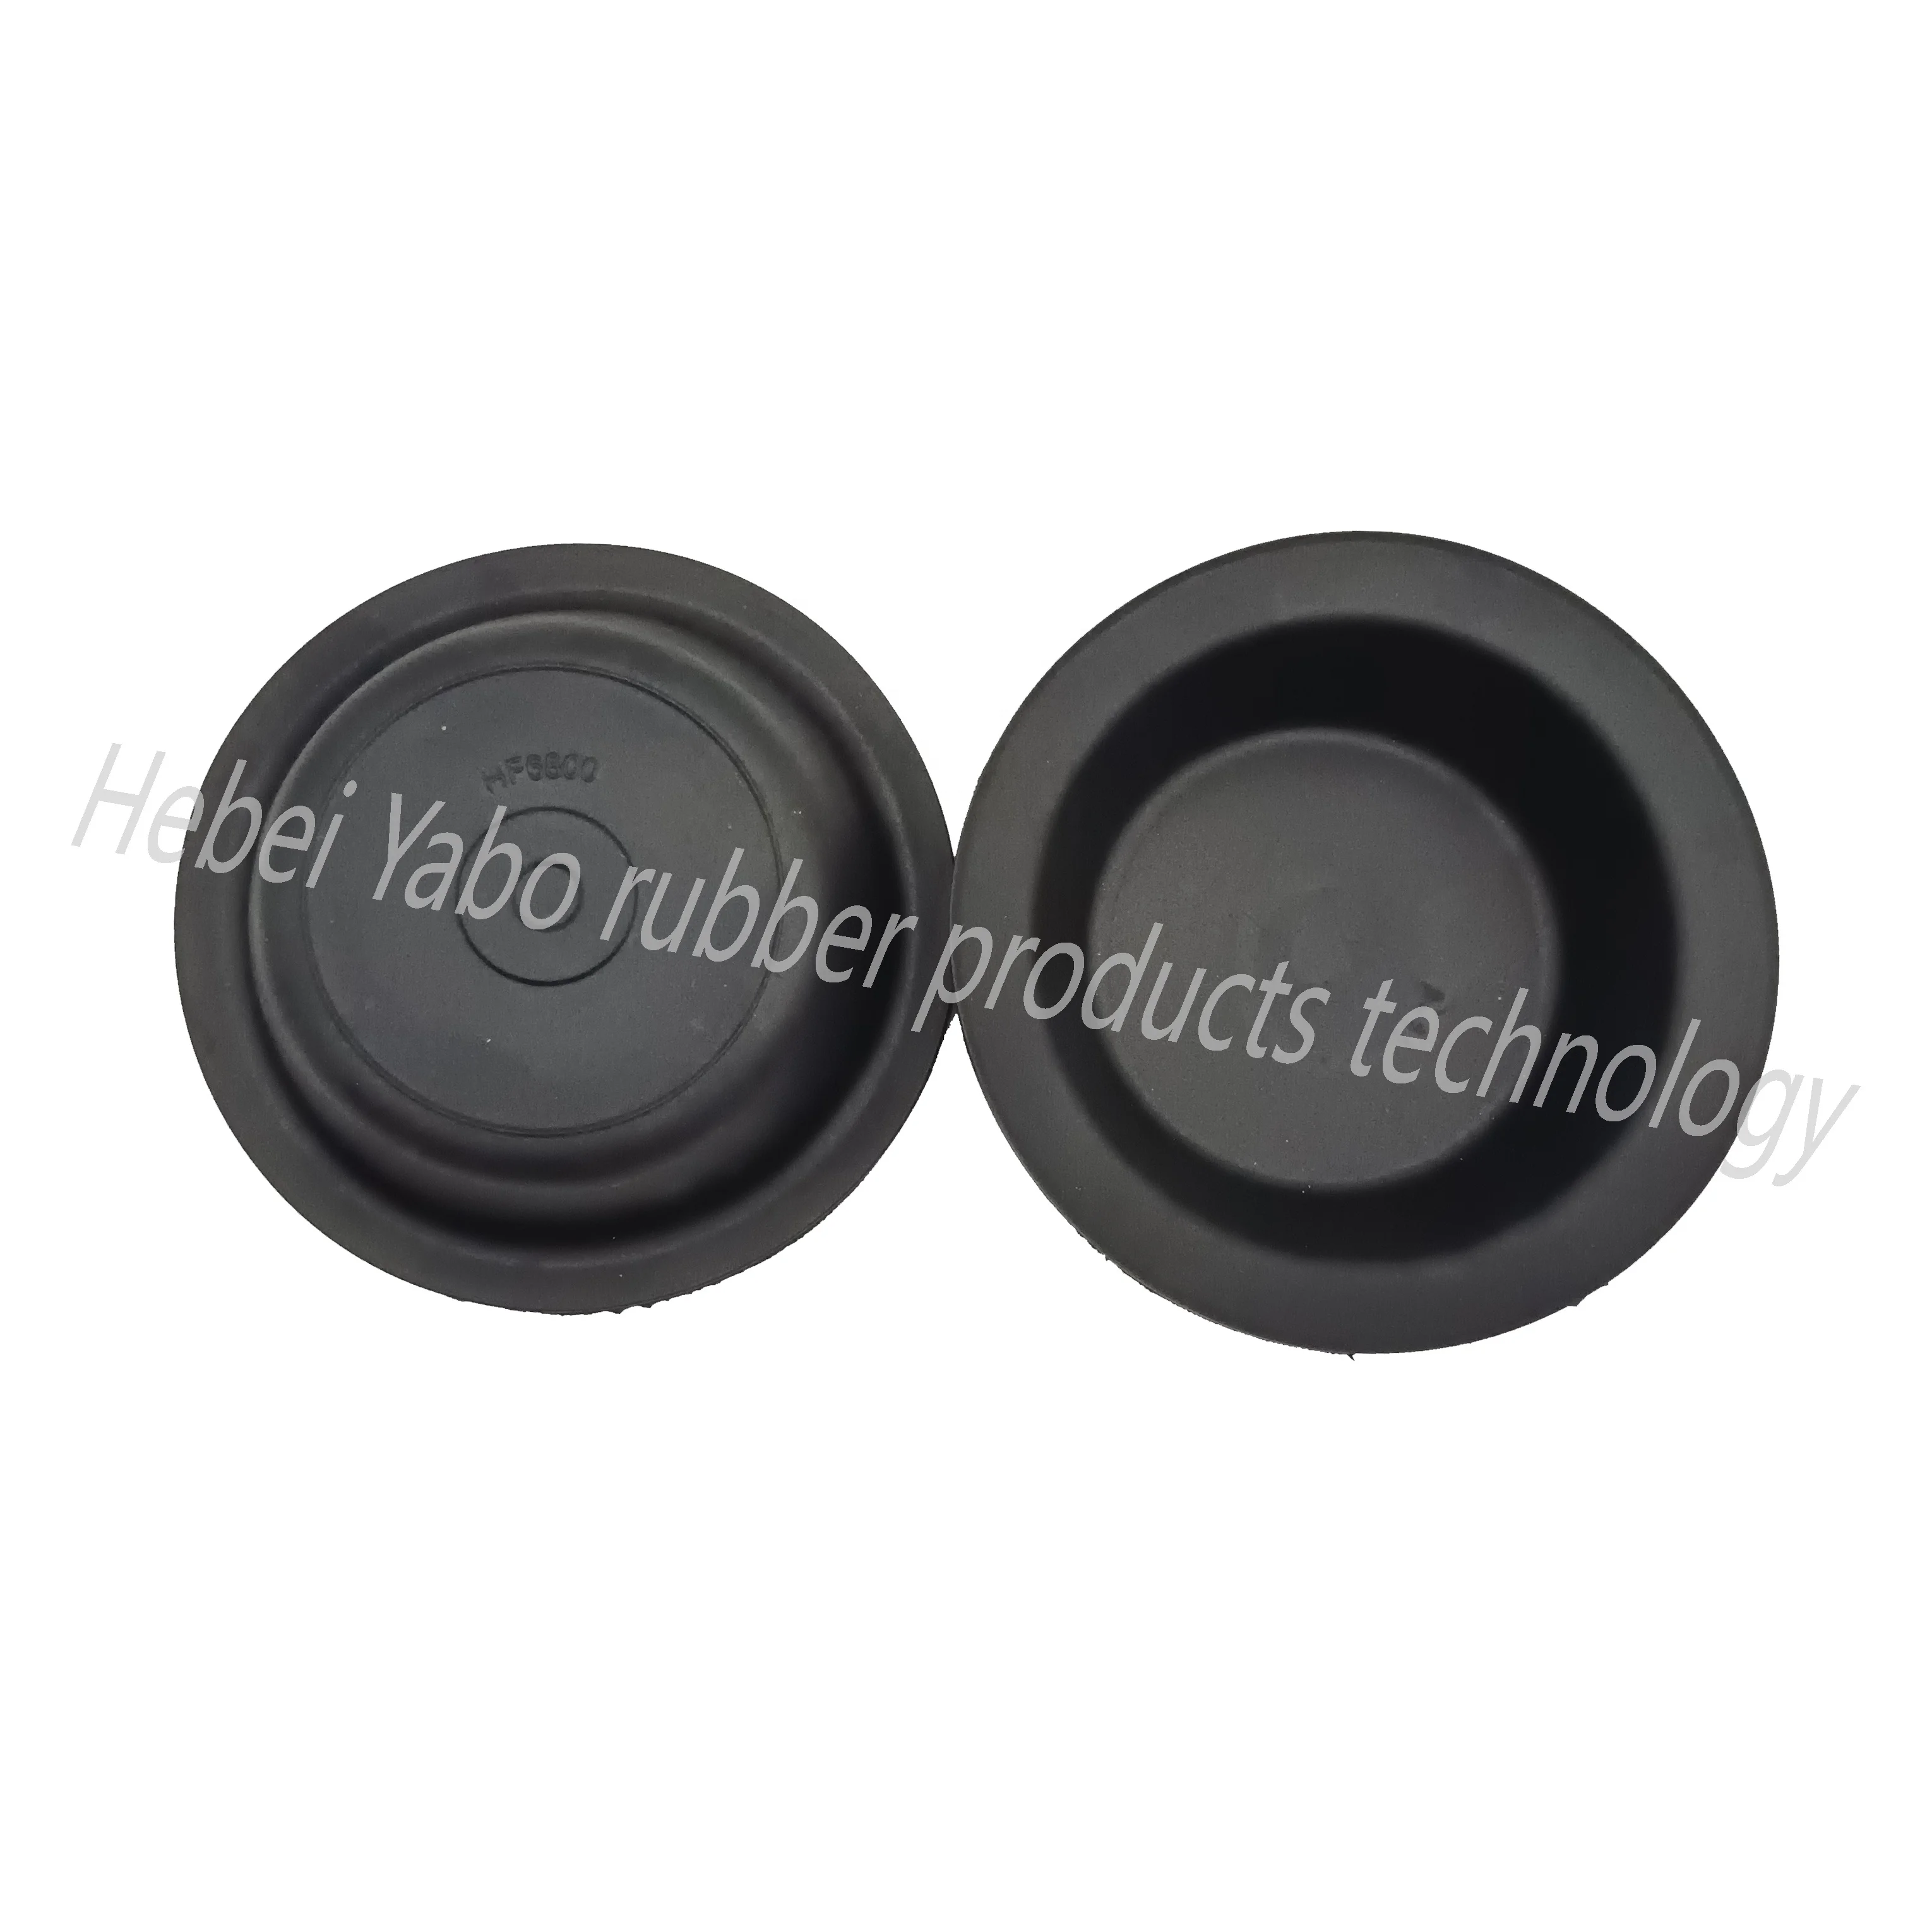 Hot selling HF6800 high quality auto accessories brake air chamber diaphragm rubber brake cup seal